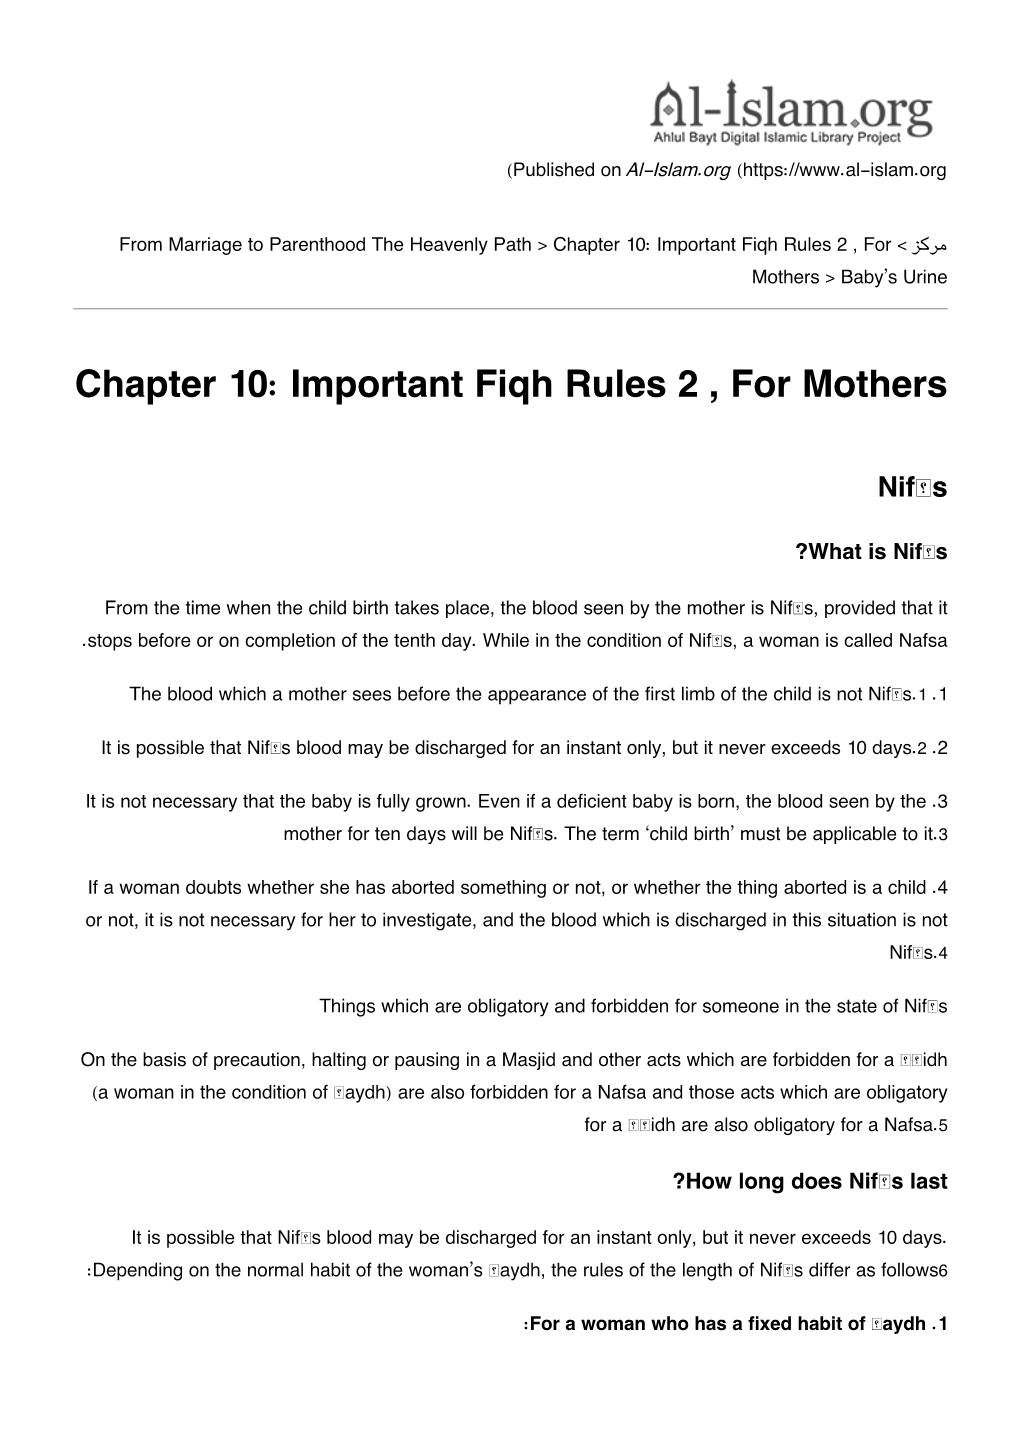 Important Fiqh Rules 2 , for Mothers > Baby’S Urine